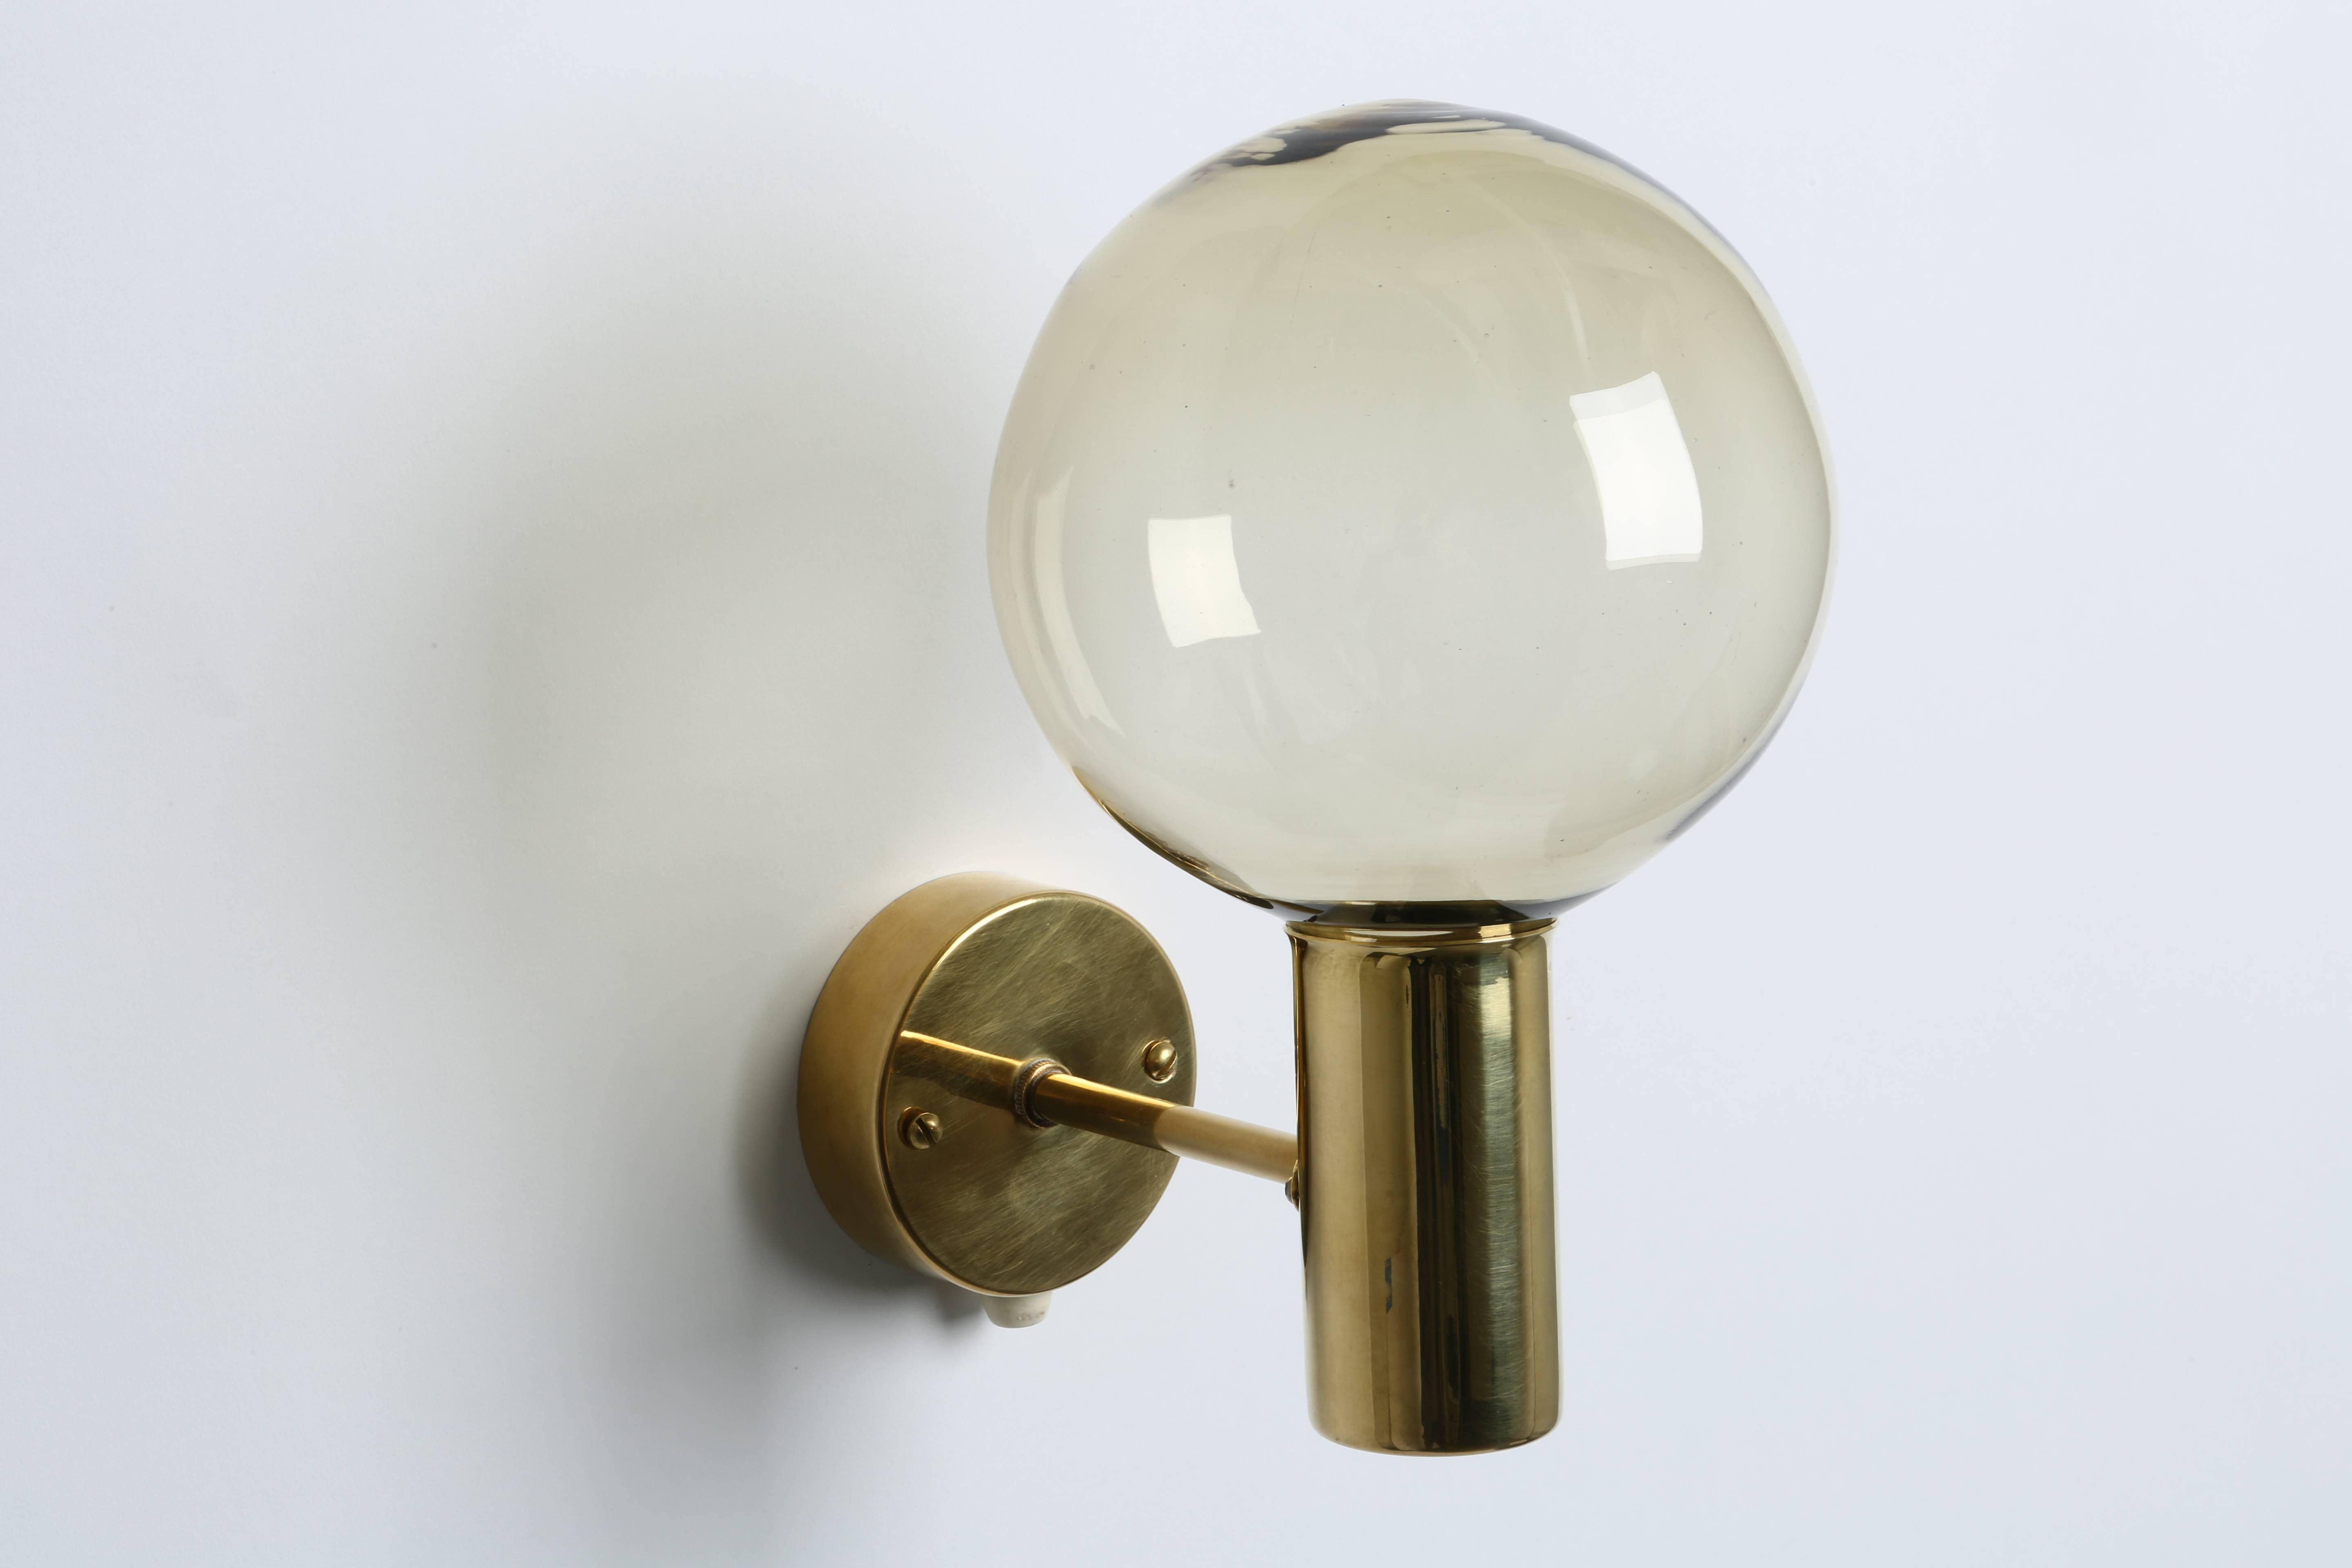 Hans-Agne Jakobsson wall lamp.
Made with brass and glass.
Sweden, 1960s.